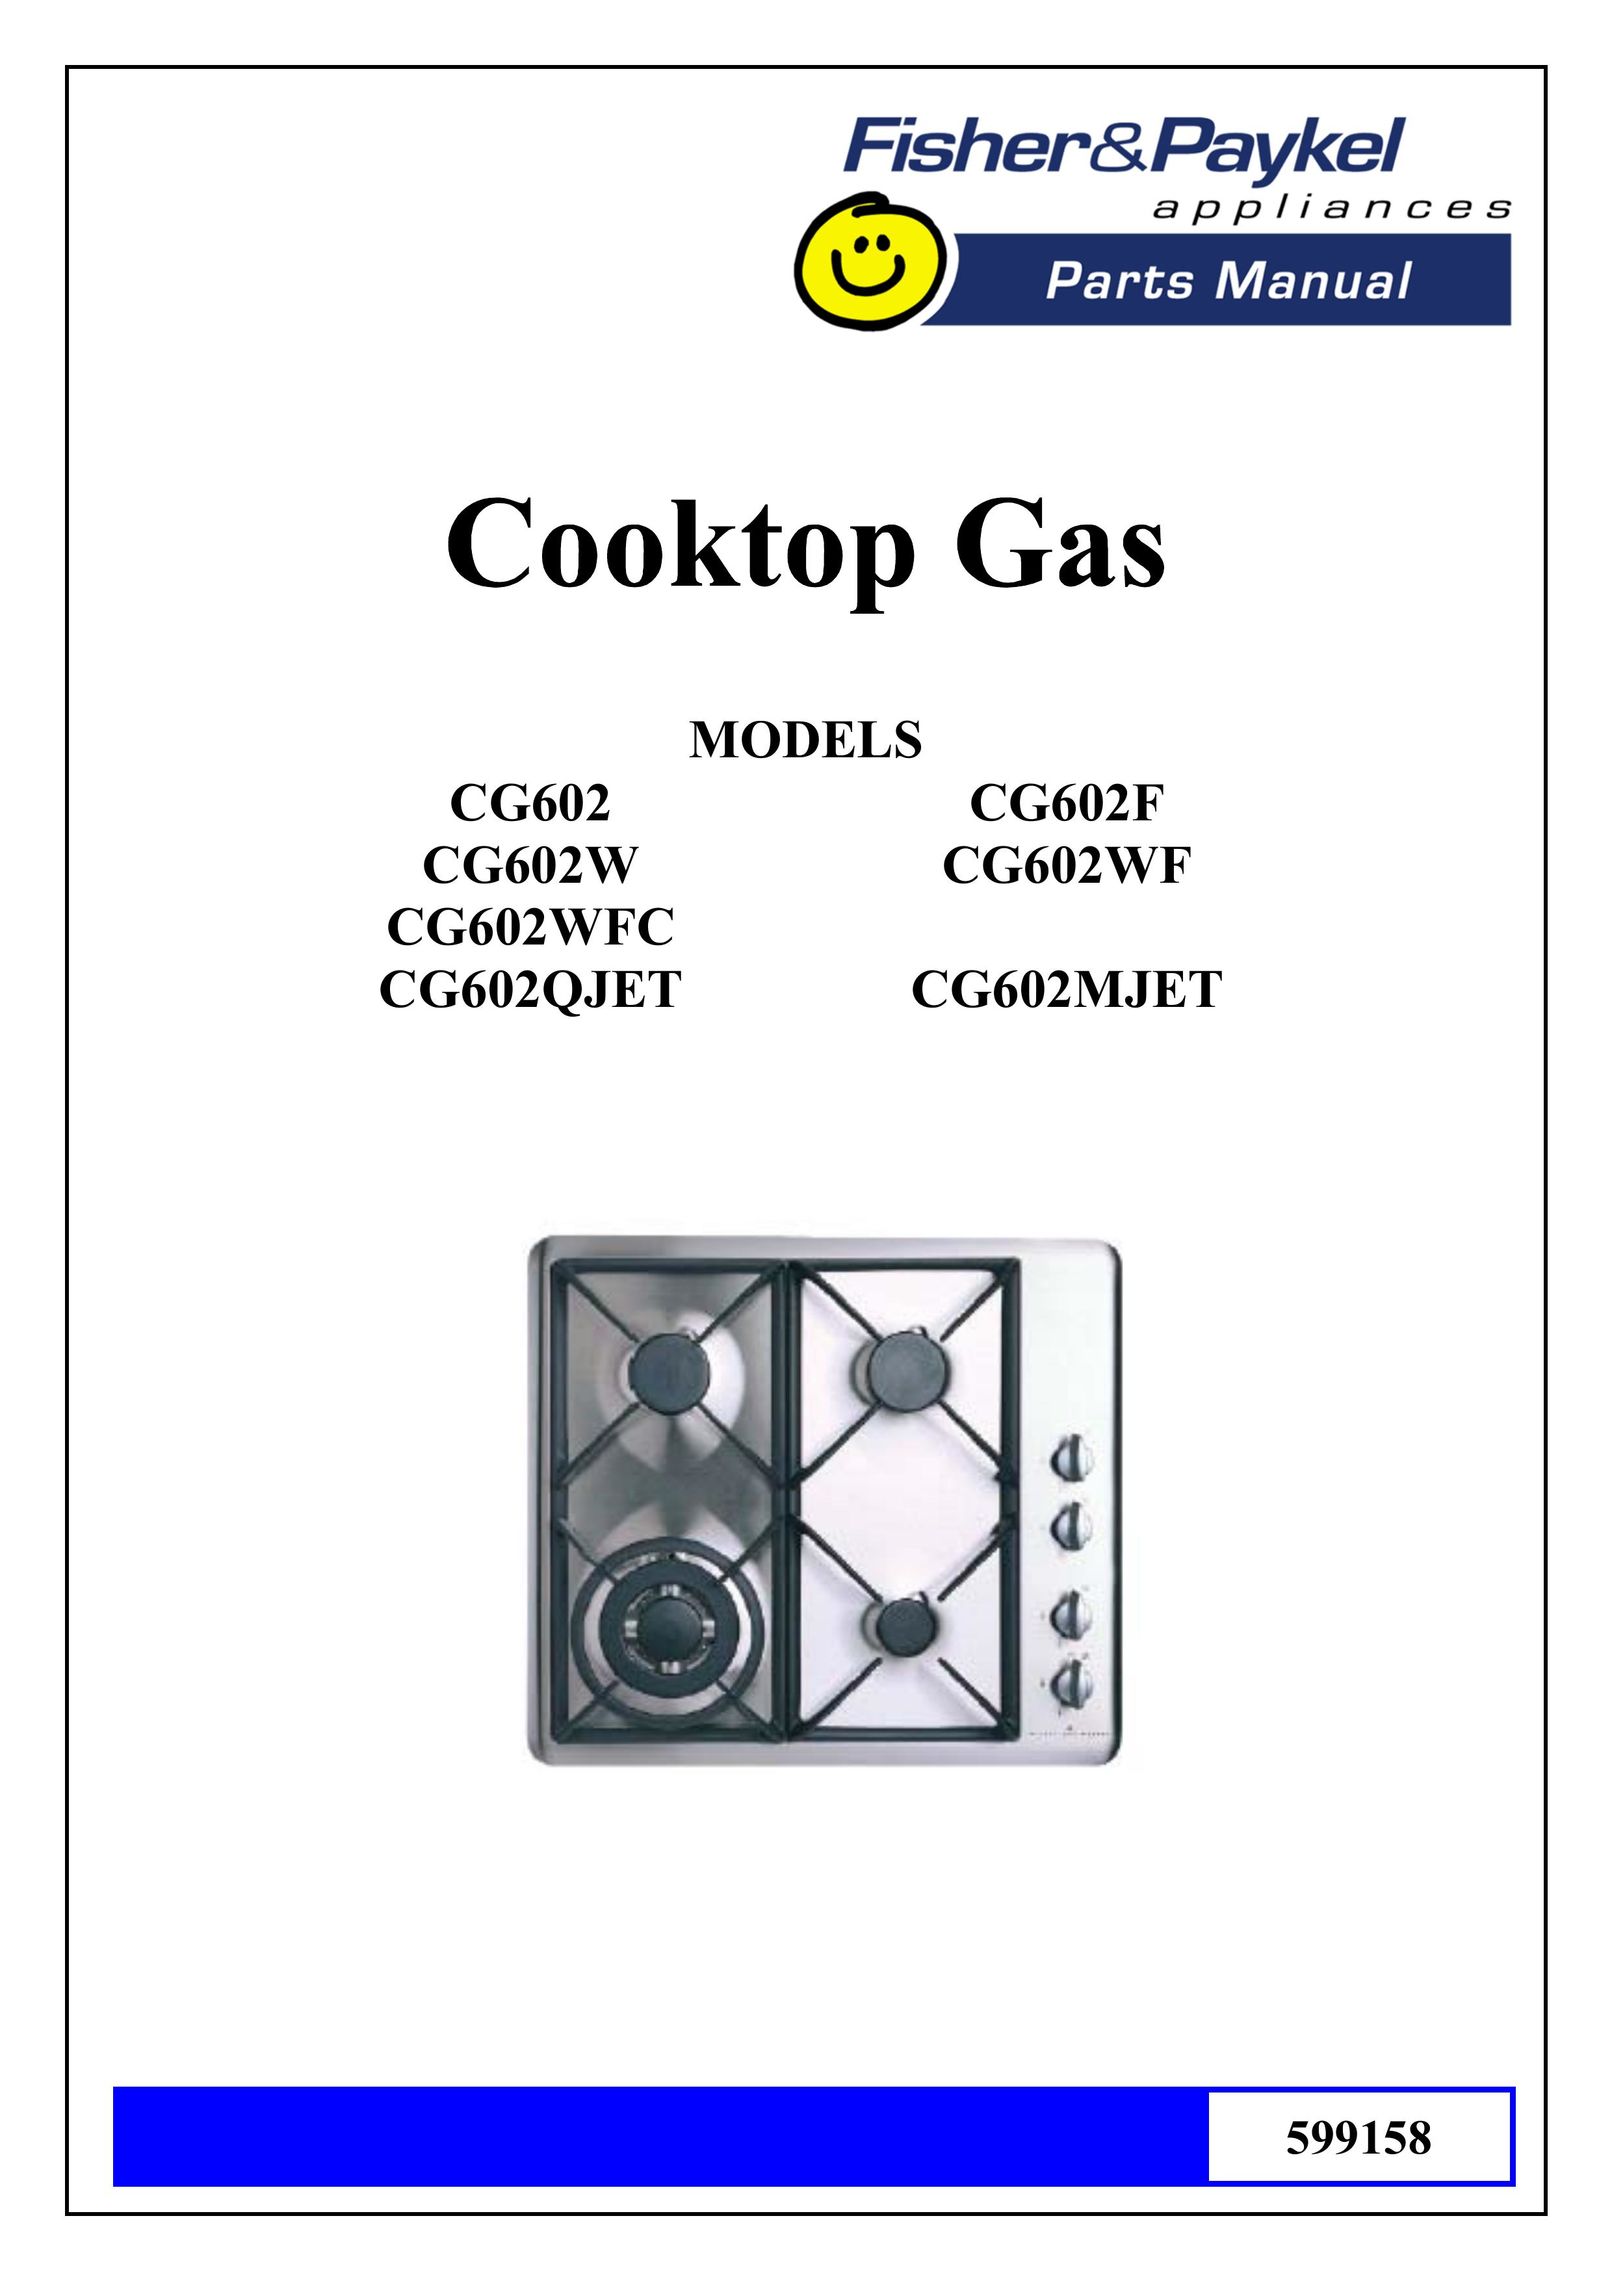 Fisher & Paykel CG602MJET Cooktop User Manual